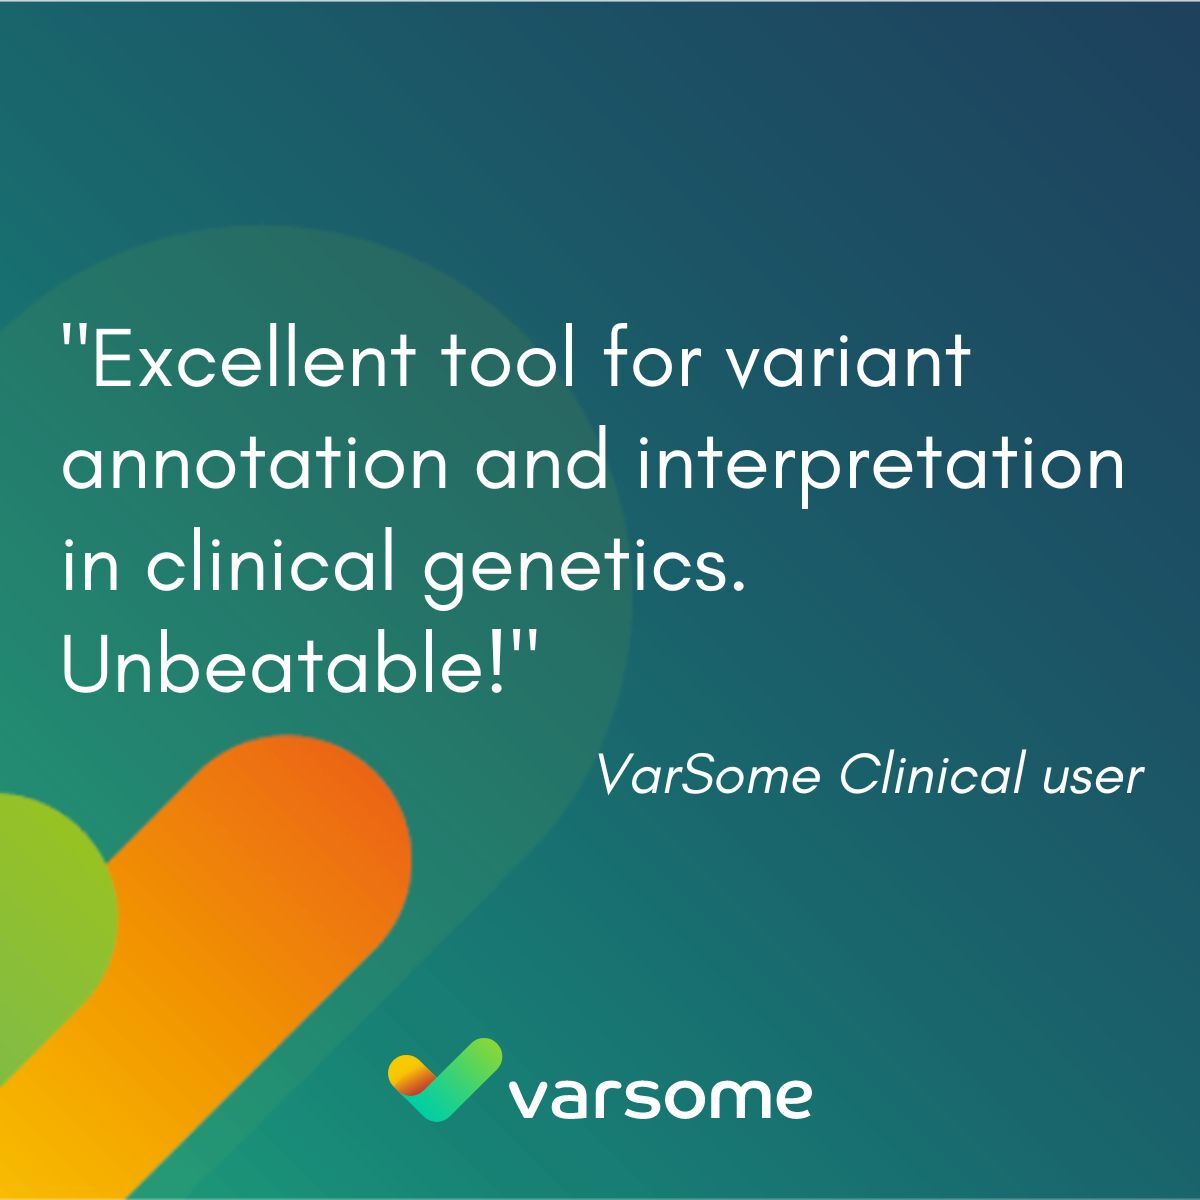 If you need convincing that VarSome is the perfect #NGS solution for you, here’s what one of our customers has to say. Book a consultation today and find out how VarSome can help you: bit.ly/VarSomeContact